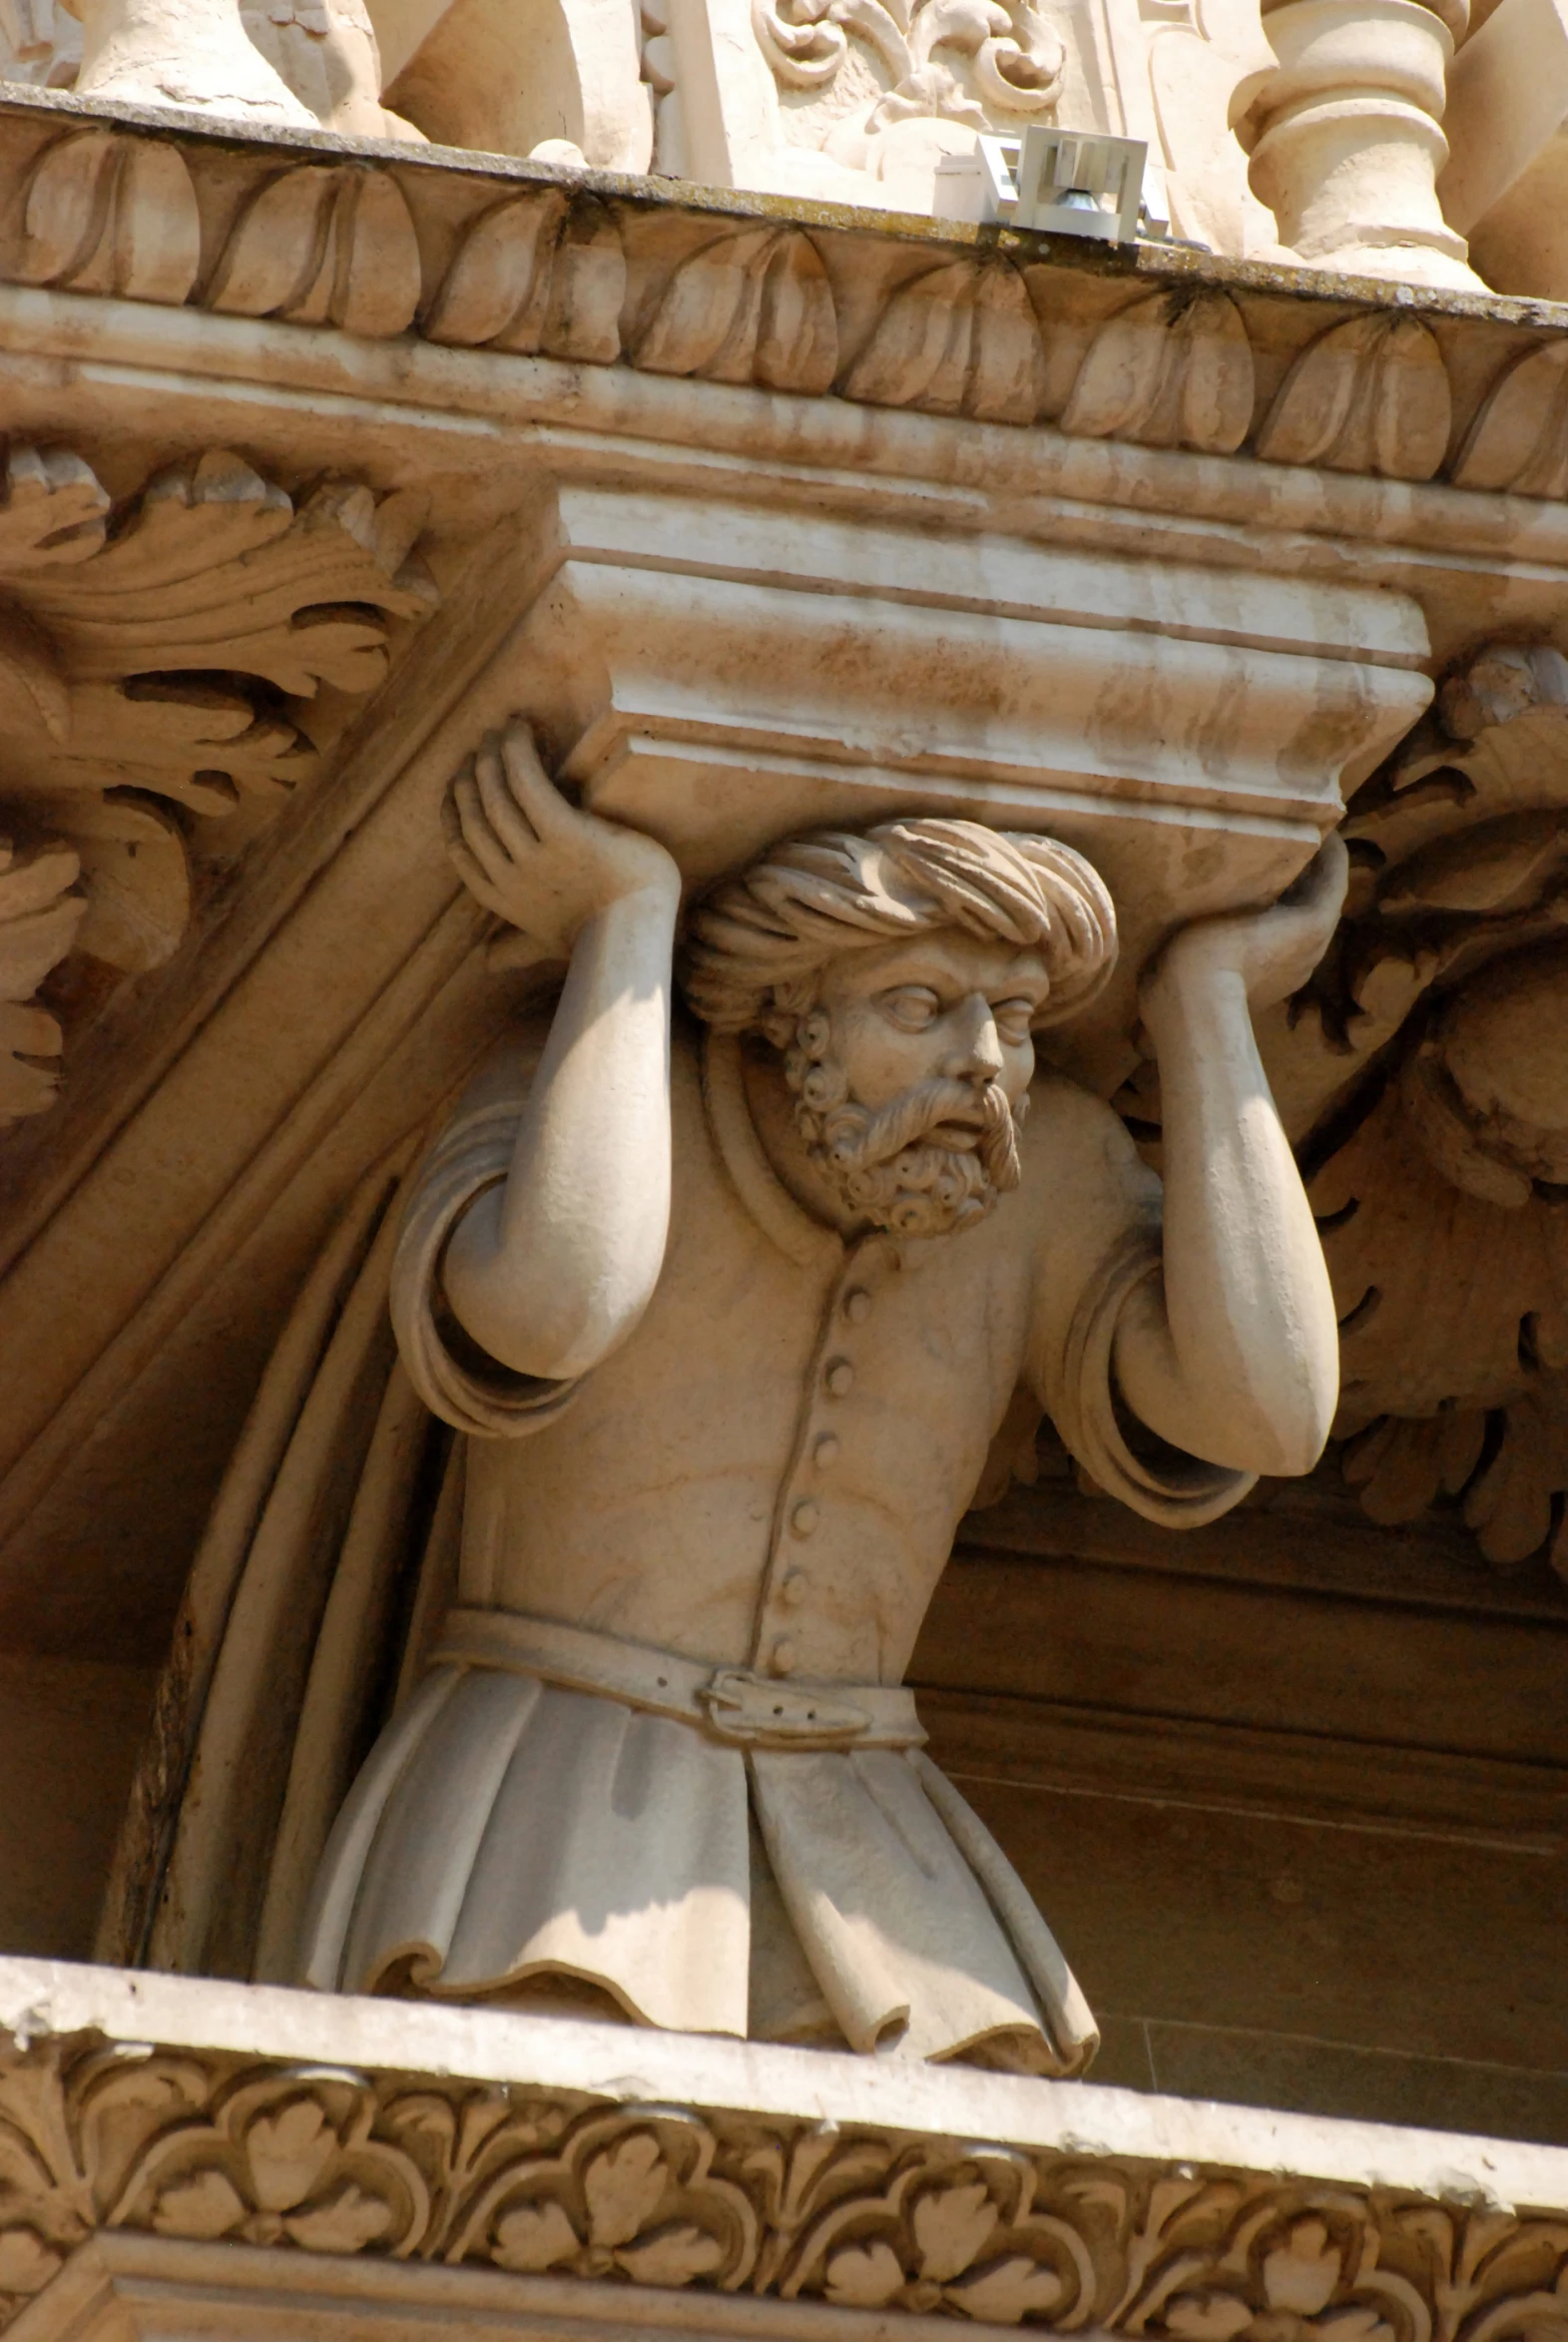 a close up of a stone statue near the building